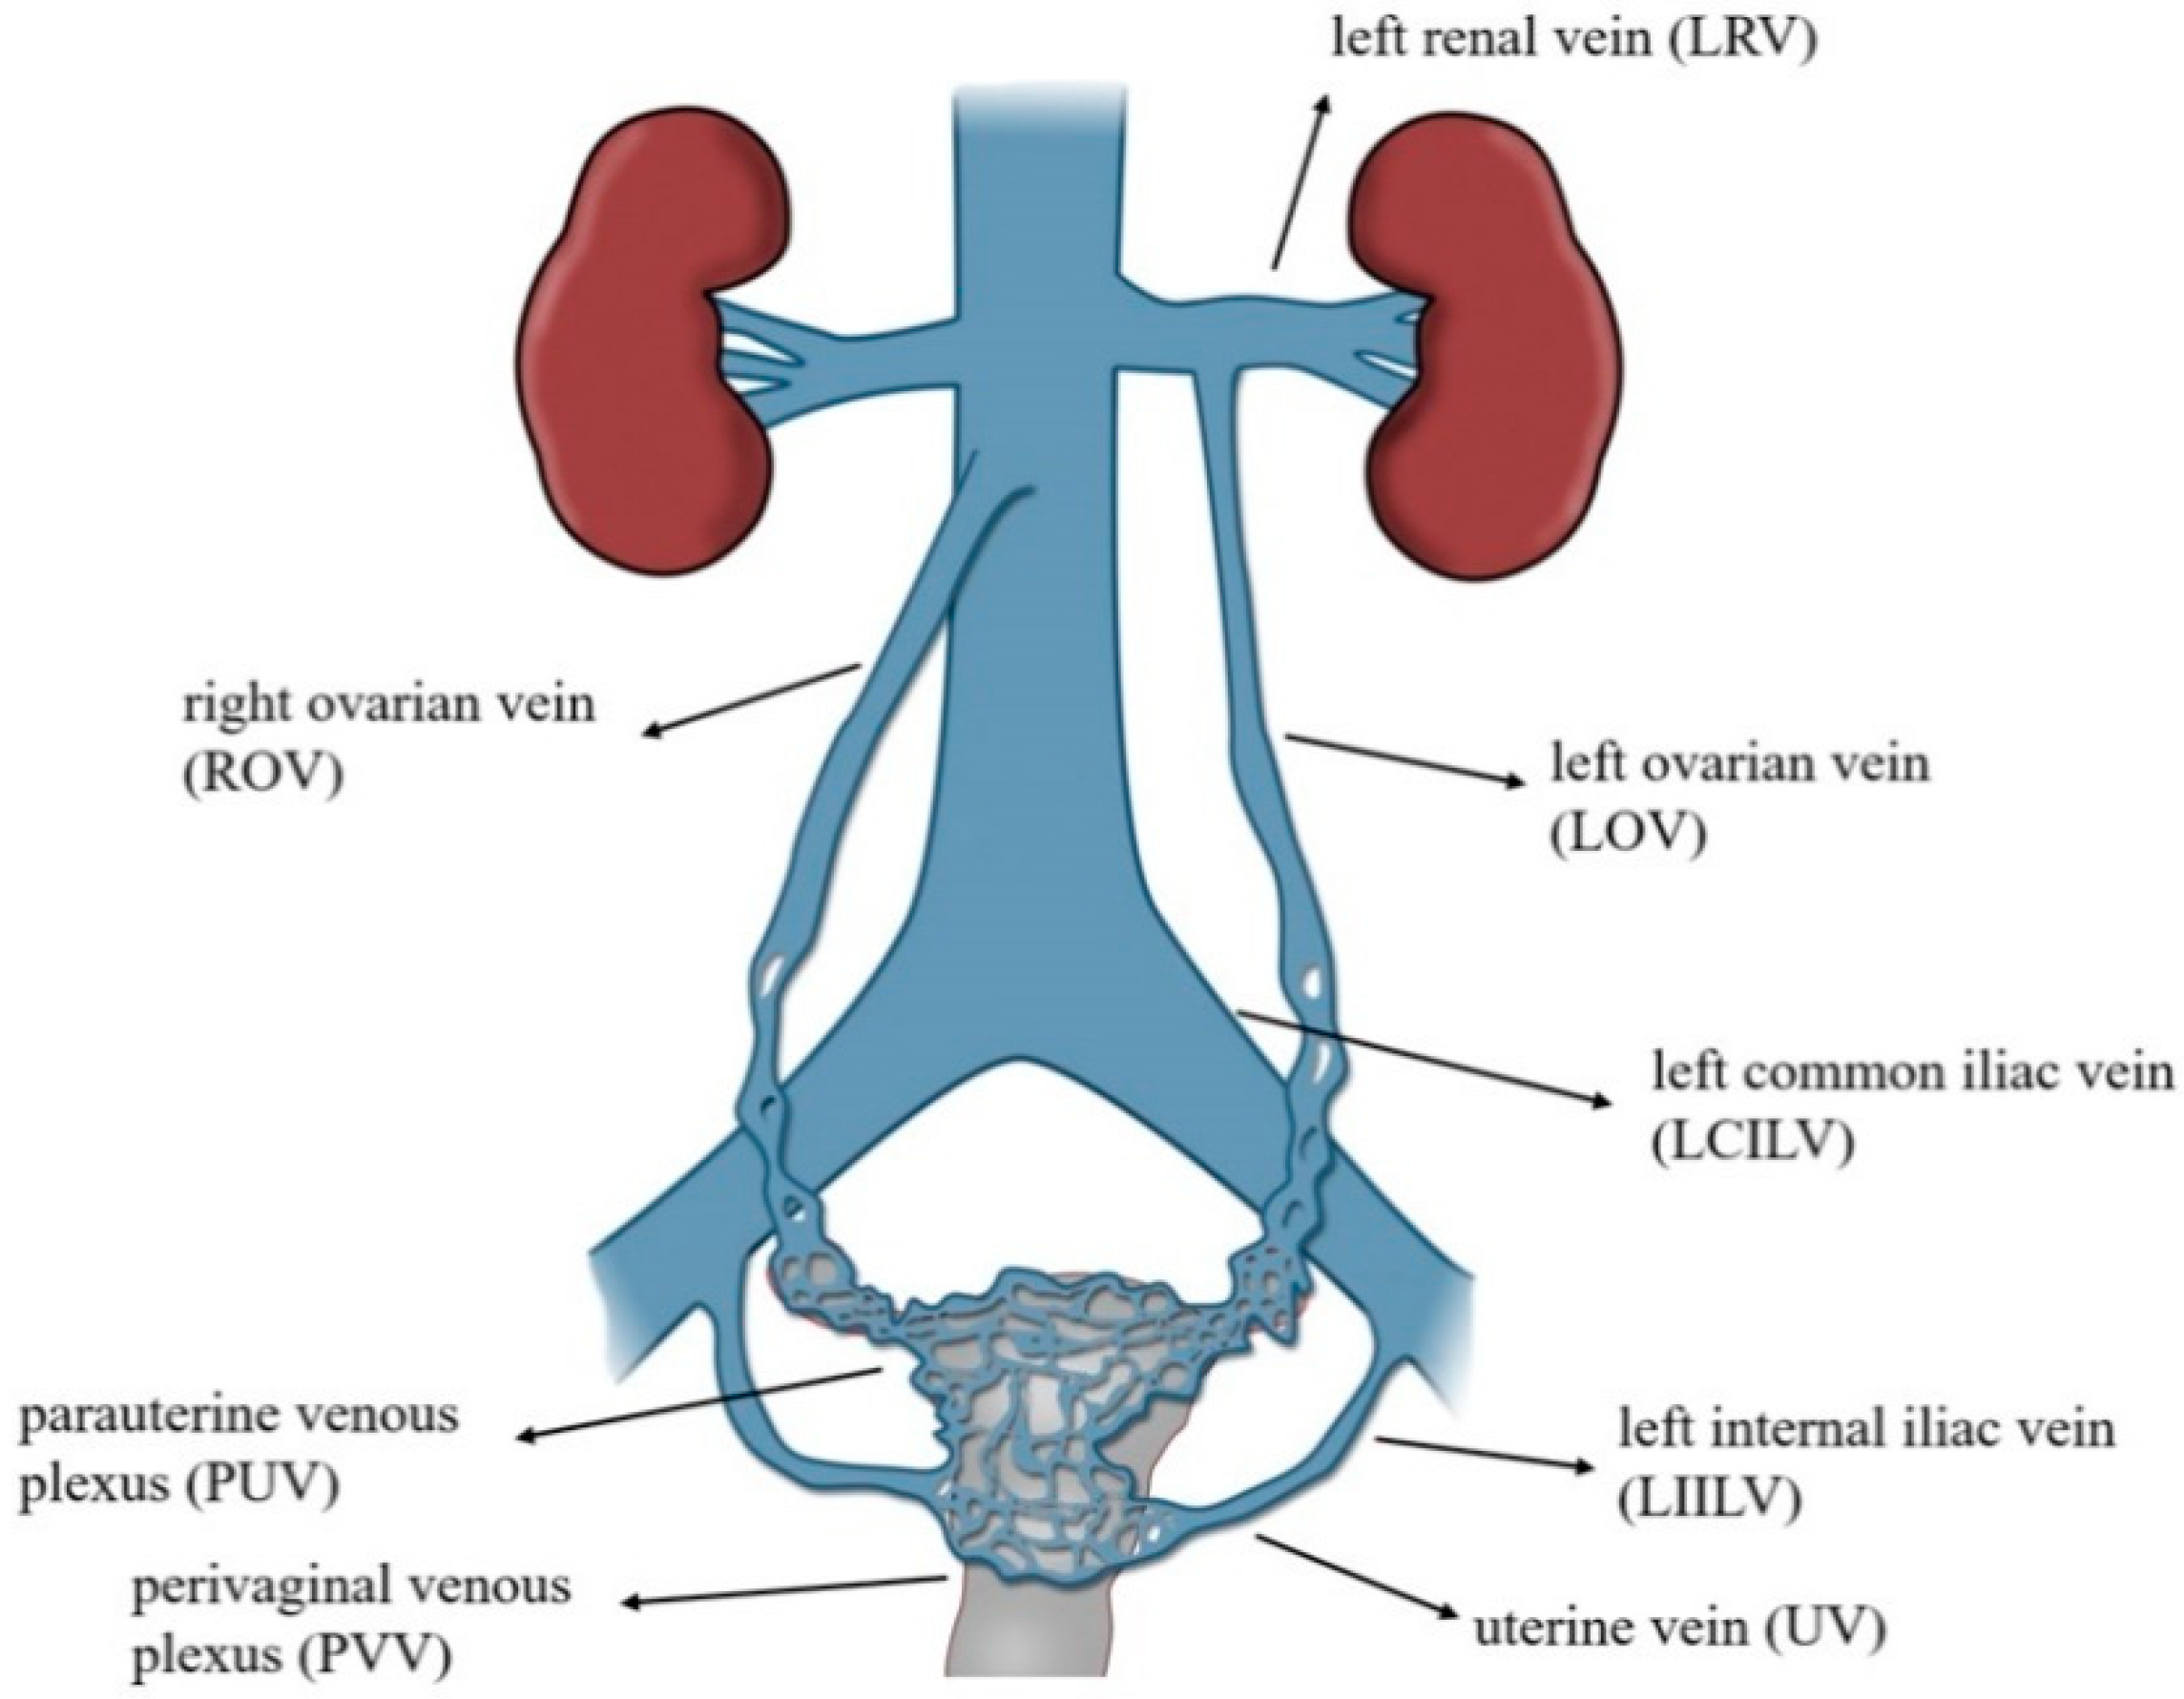 Chronic venous outflow obstruction: An important cause of chronic